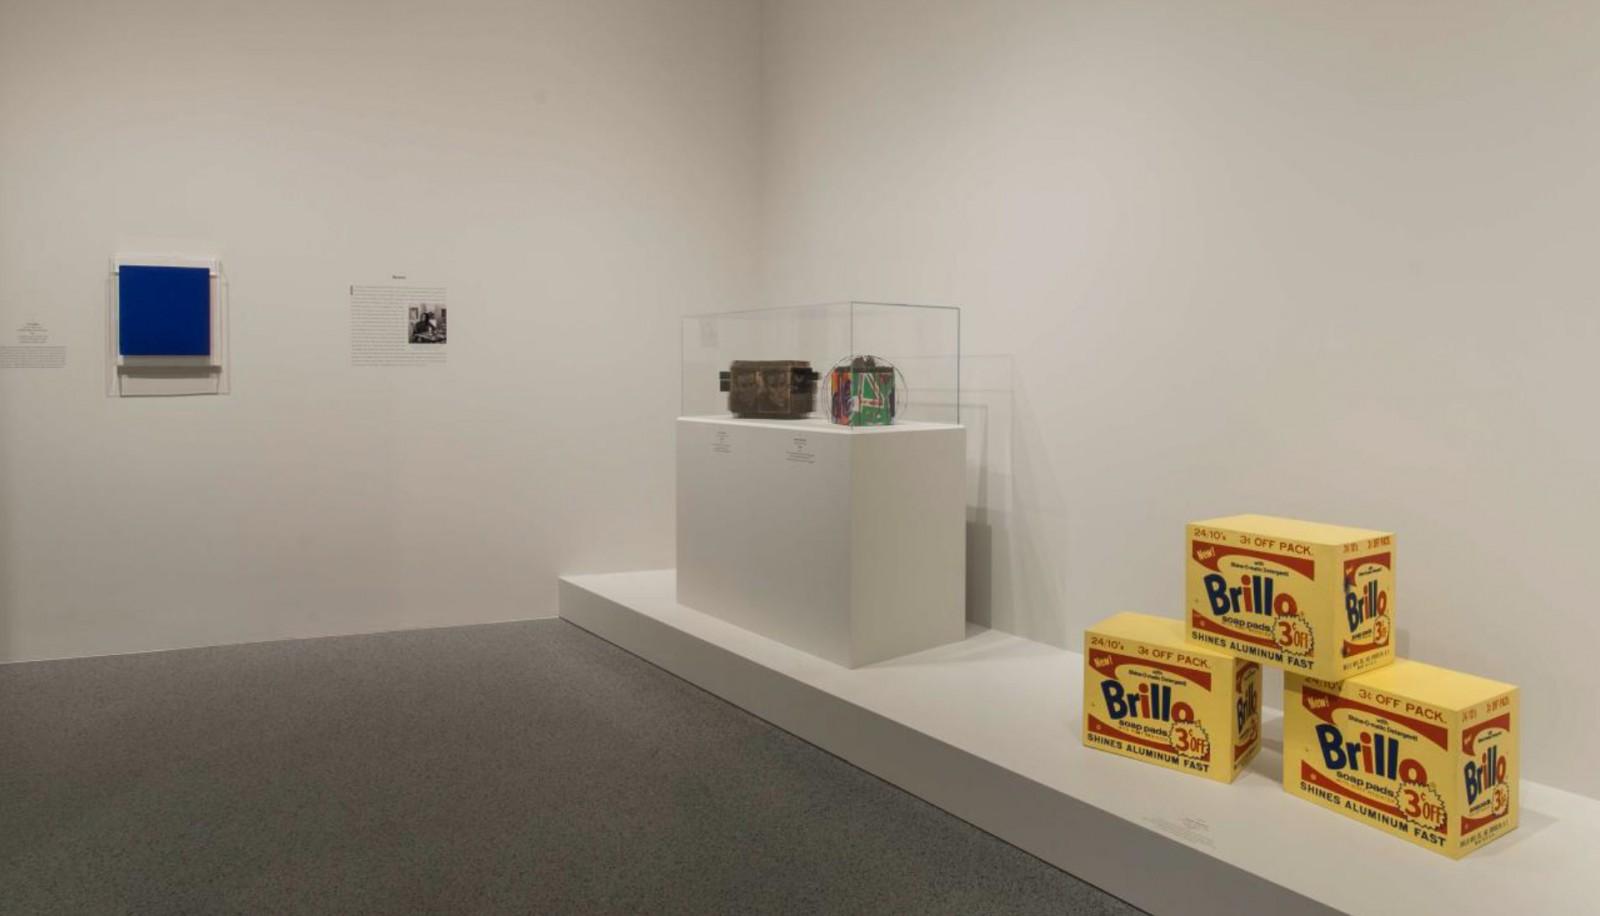 View of the exhibition "From Los Angeles to New York: The Dwan Gallery 1959-1971", National Gallery of Art, 2017 (IKB 187)